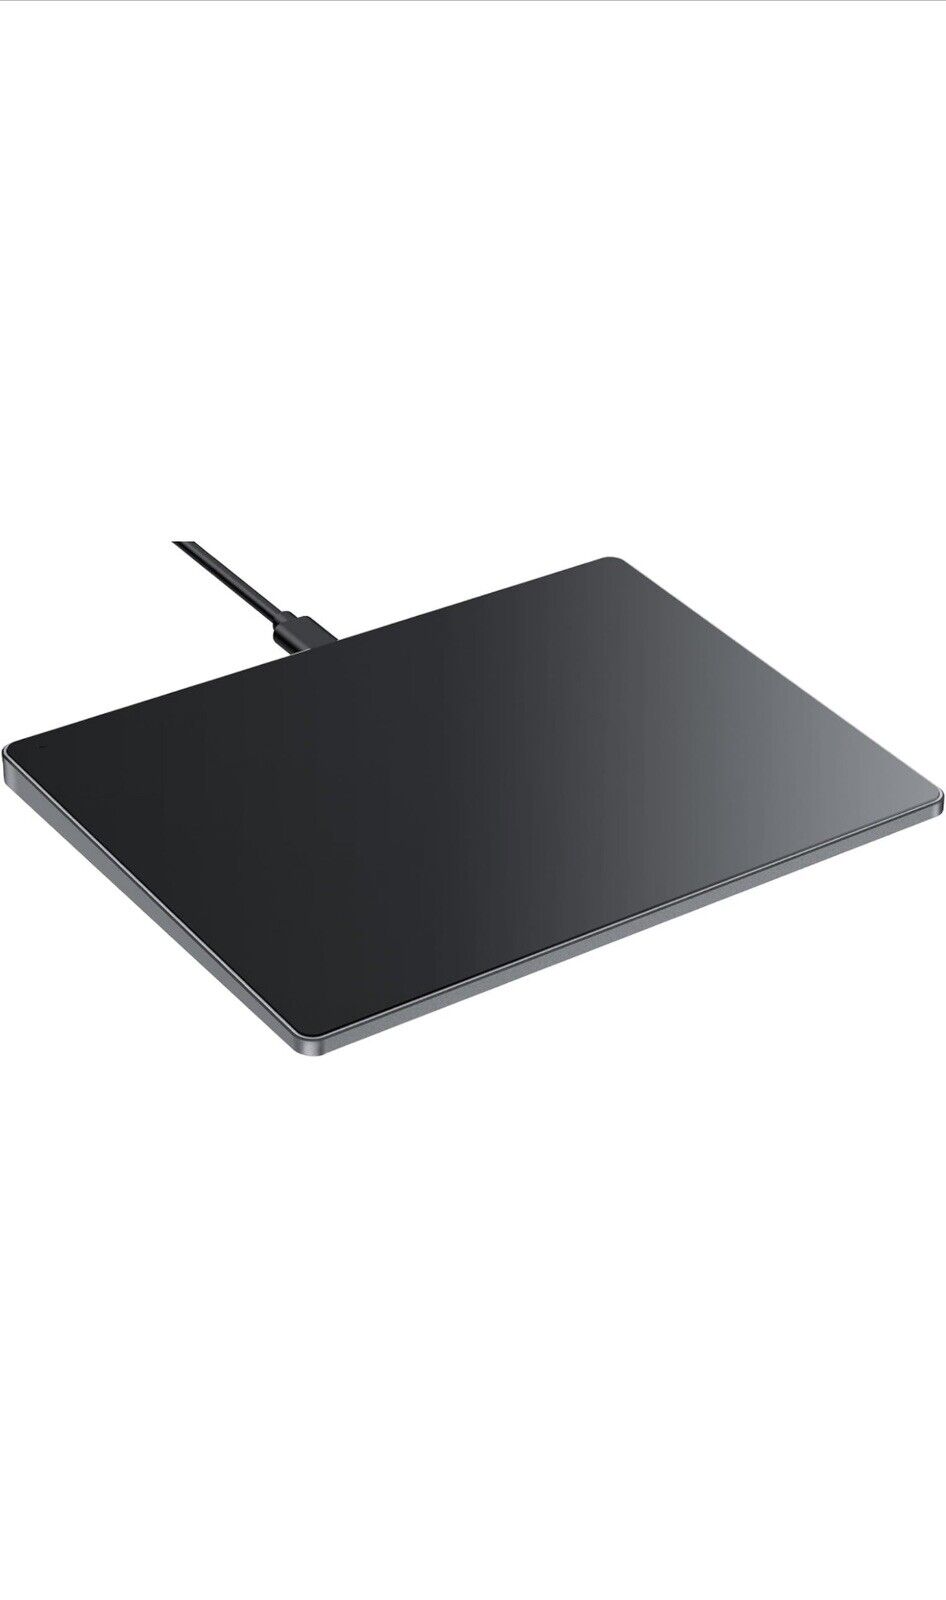 seenda Upgraded Trackpad, Tempered Glass Surface with Multi-Touch -black